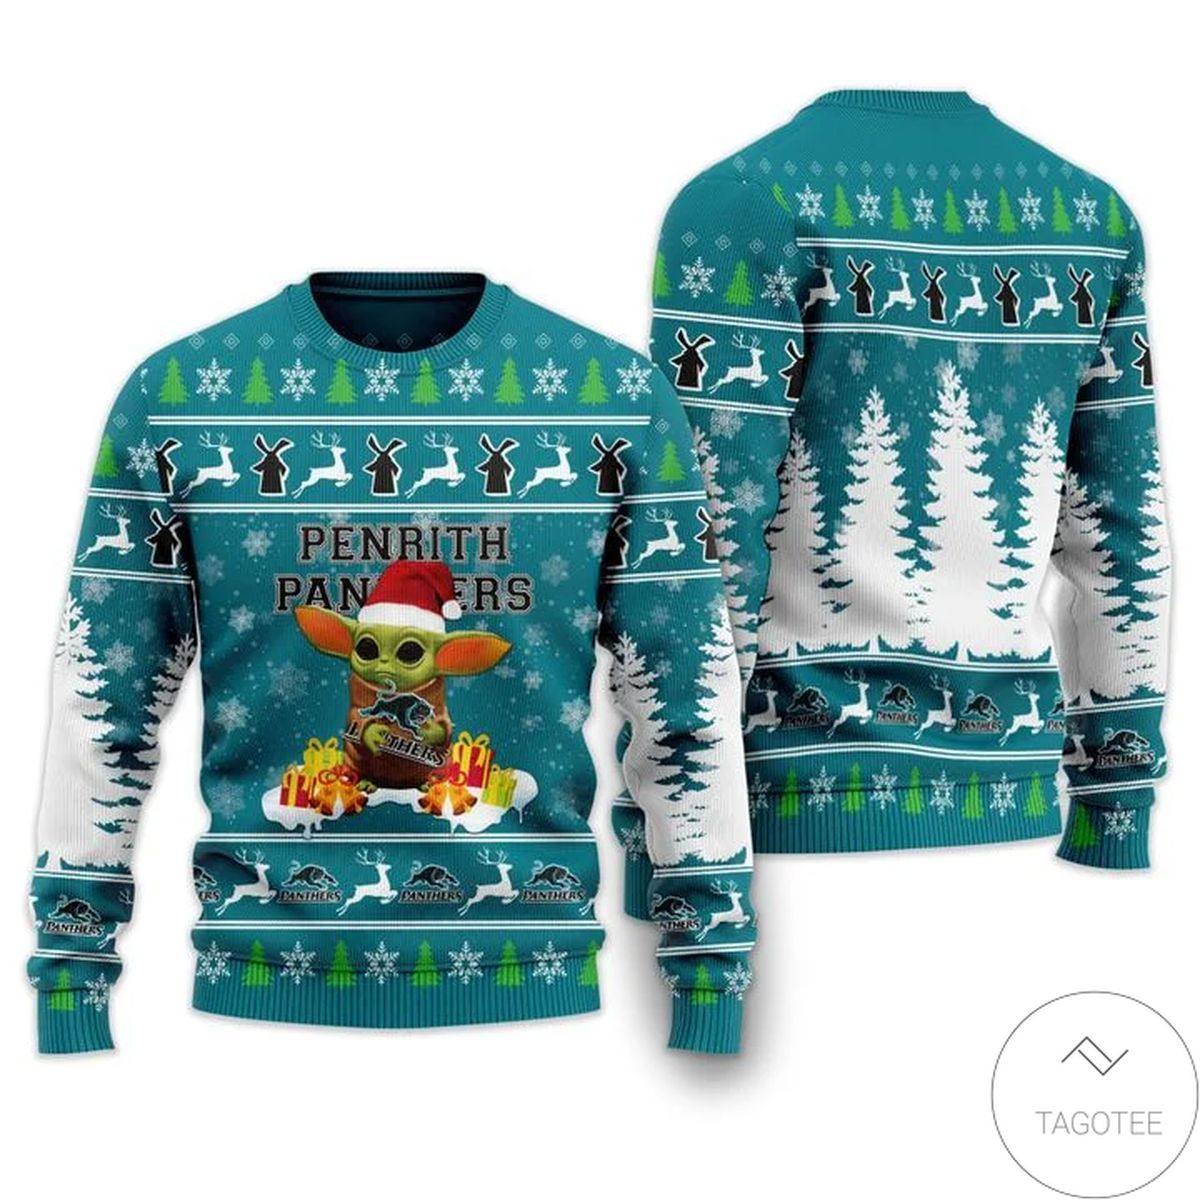 Penrith Panthers Baby Yoda Ugly Christmas Sweater